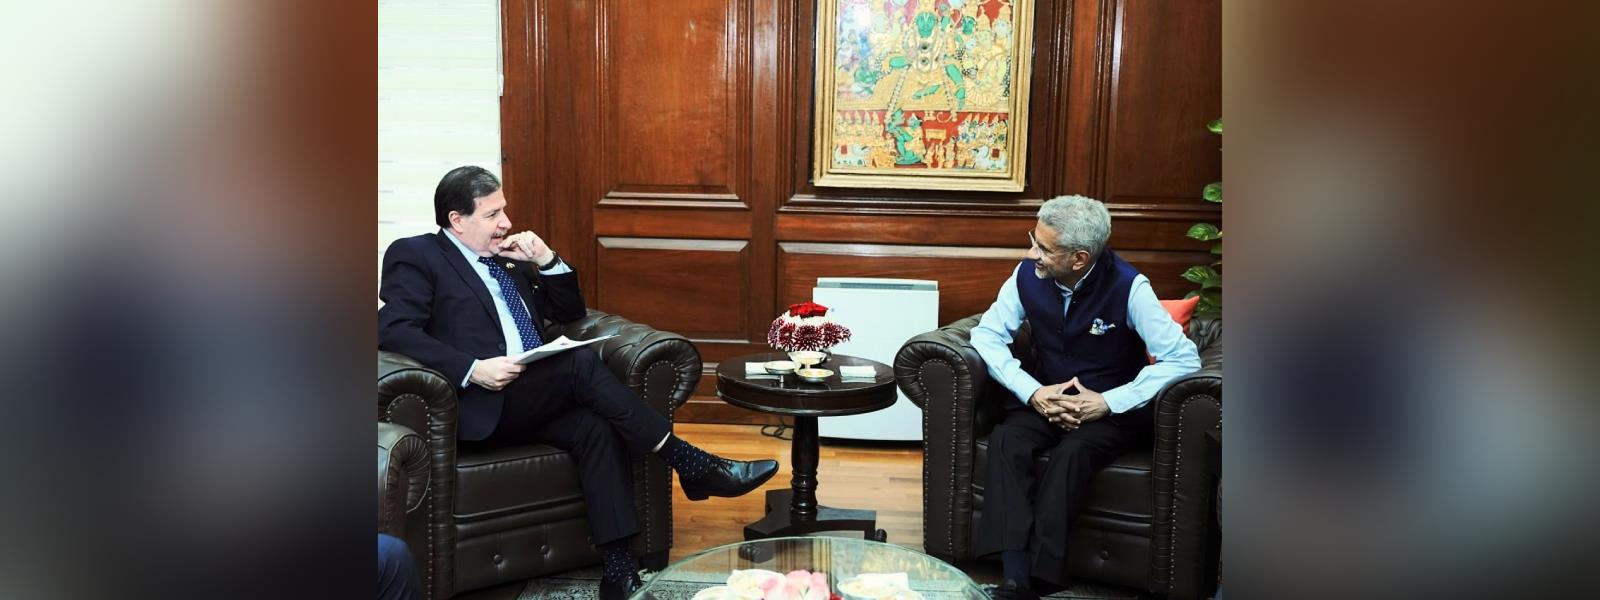 External Affairs Minister Dr. S. Jaishankar met H. E. Mr. Alex Wetzig Abdale, Secretary General for Foreign Policy of Chile in New Delhi